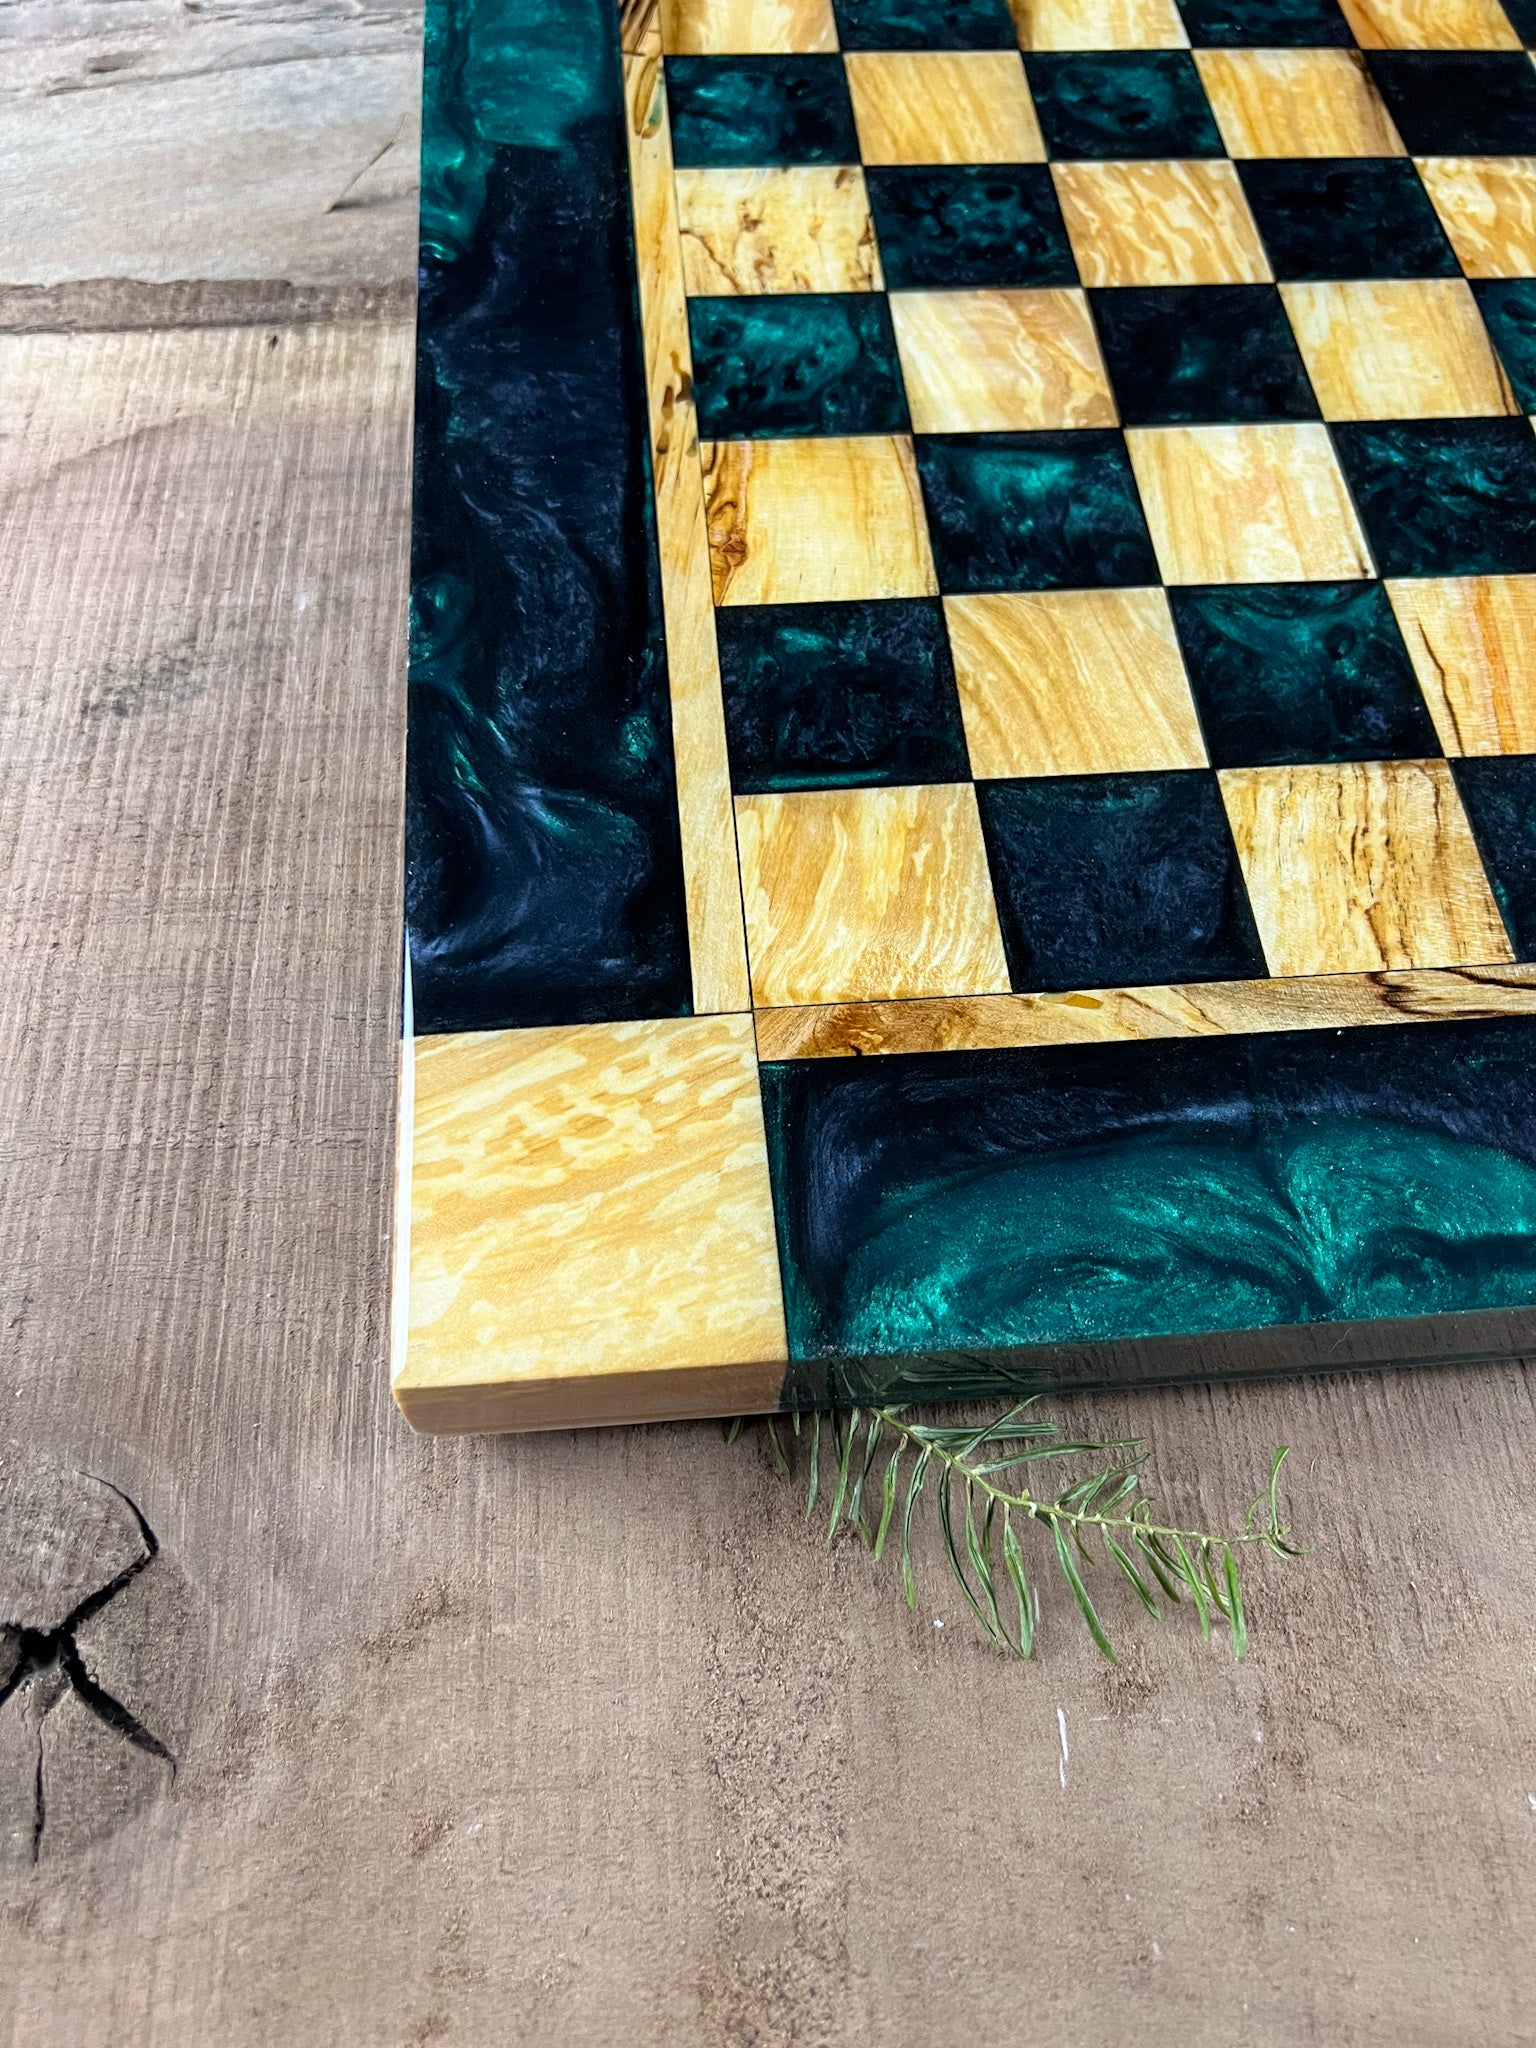 Emerald Black Onyx Maple Wood Chess Board (With Border)